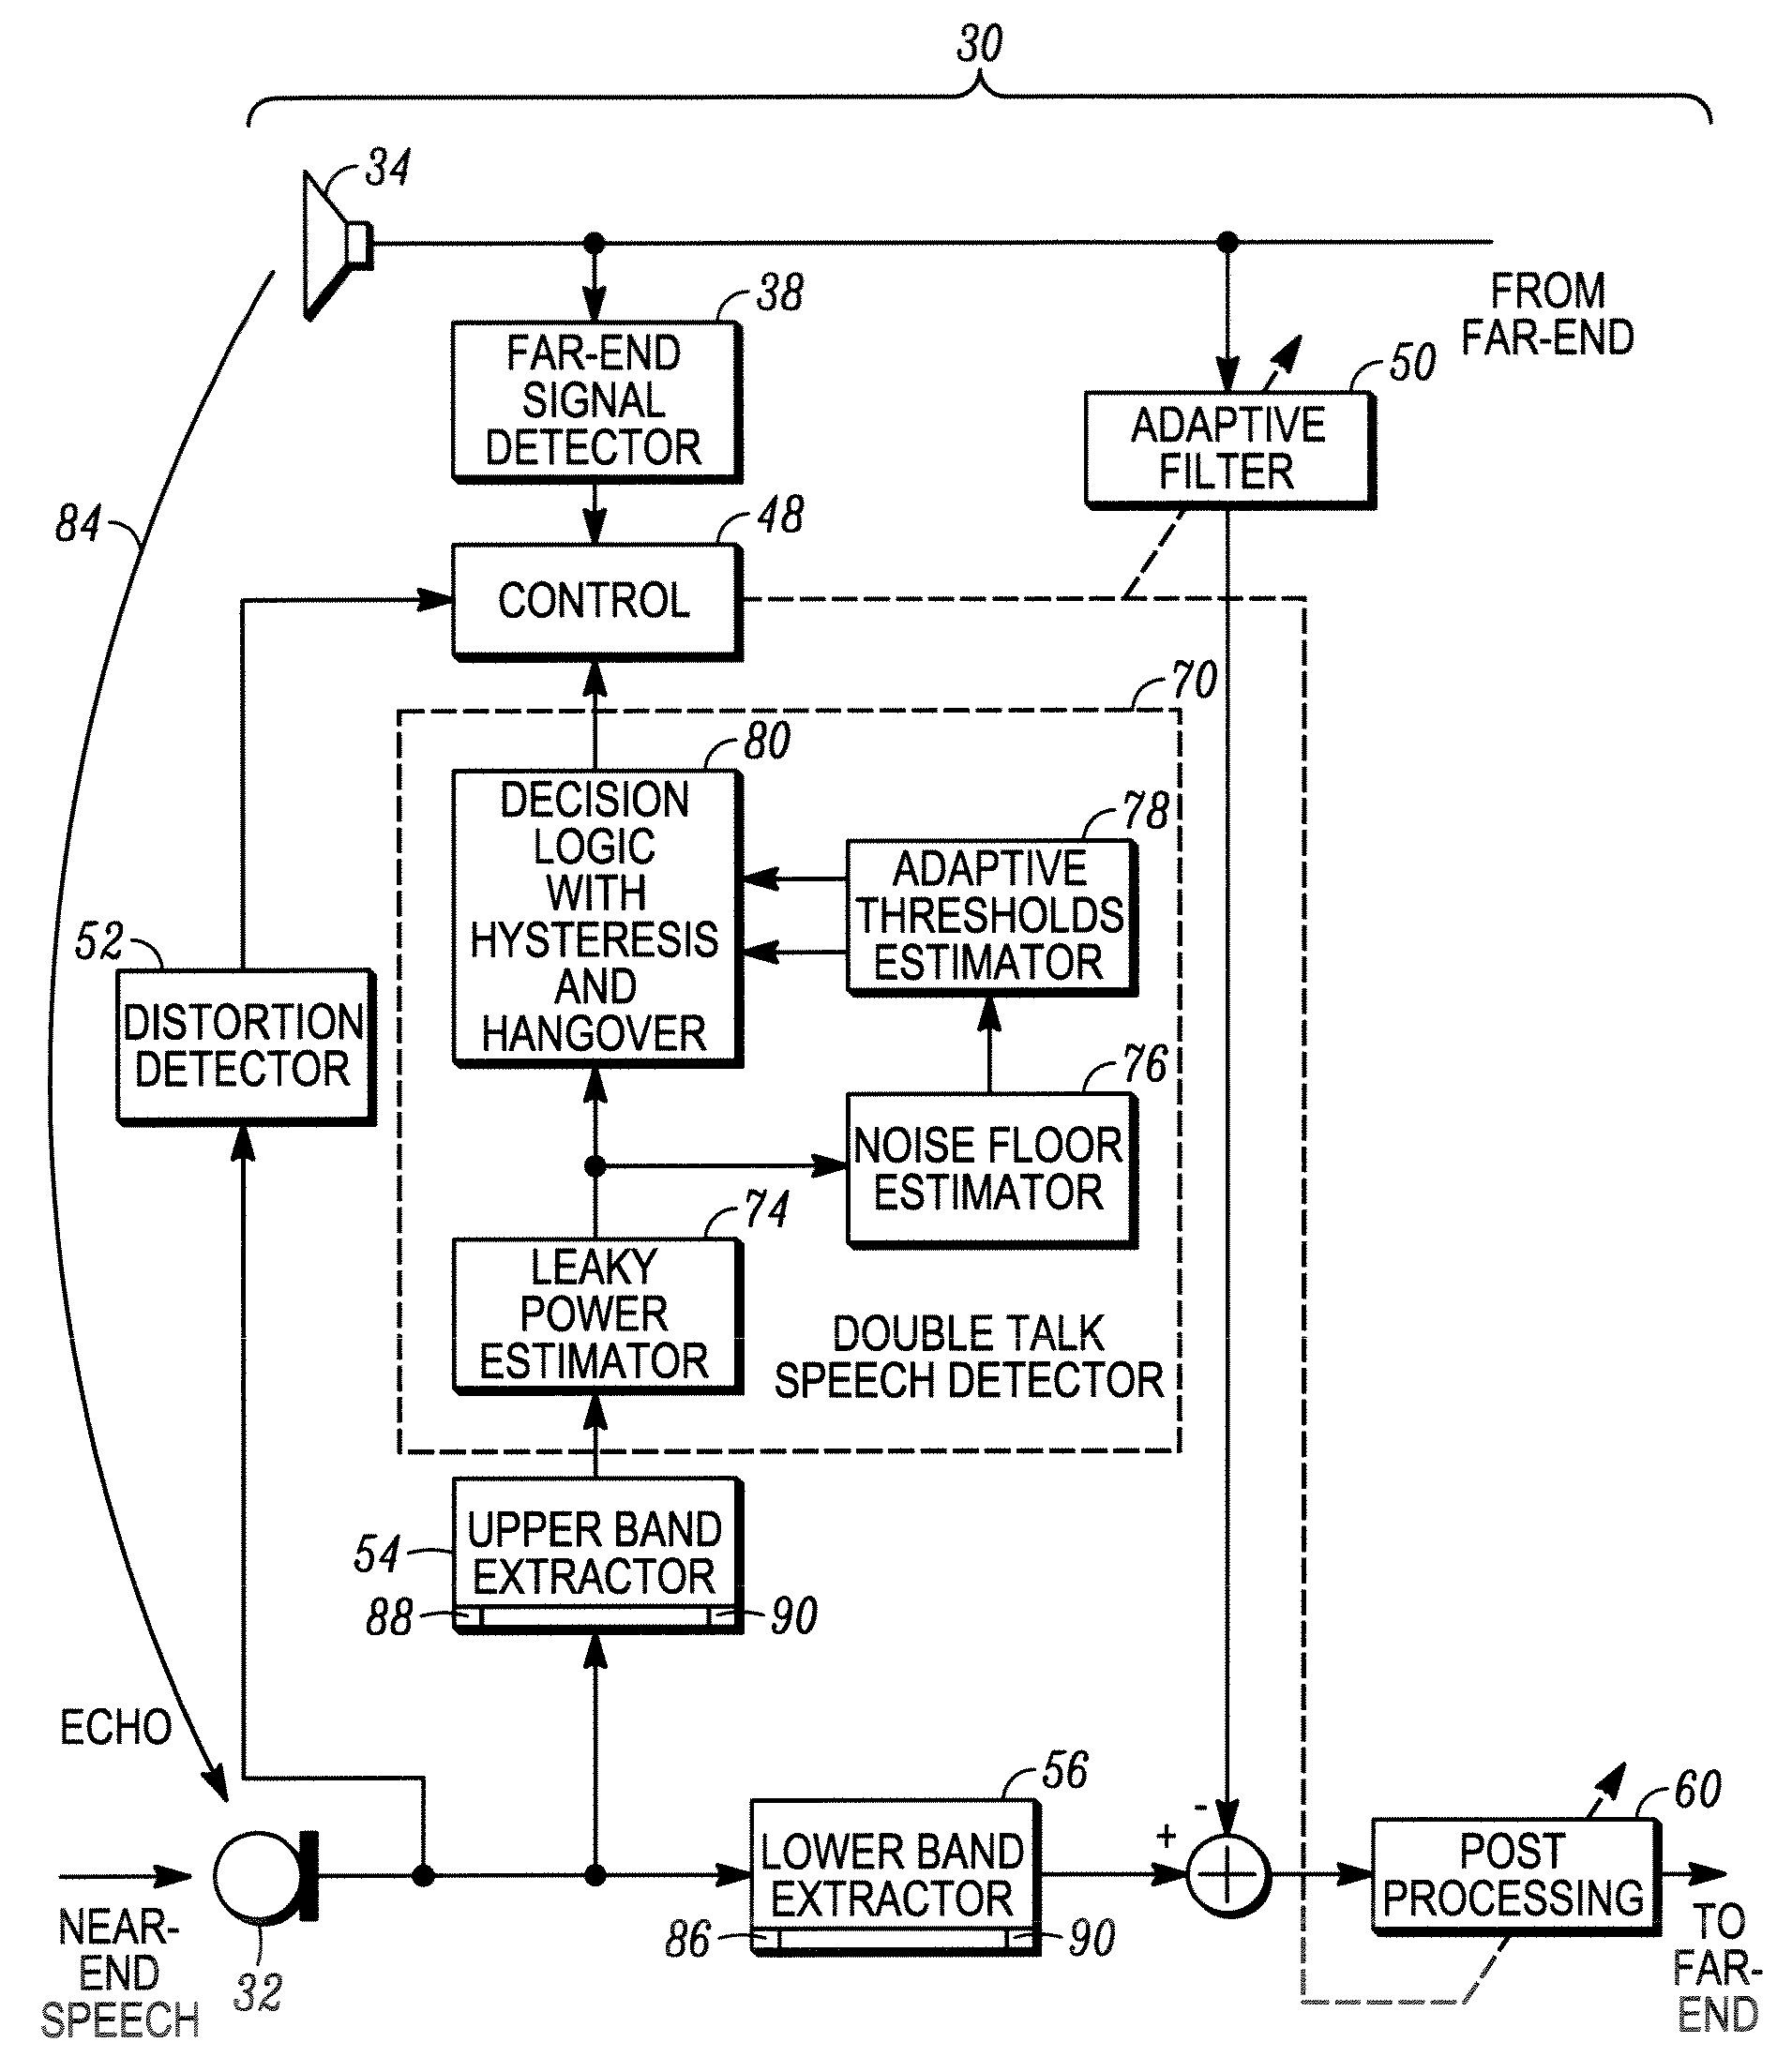 Method and apparatus for double-talk detection in a hands-free communication system